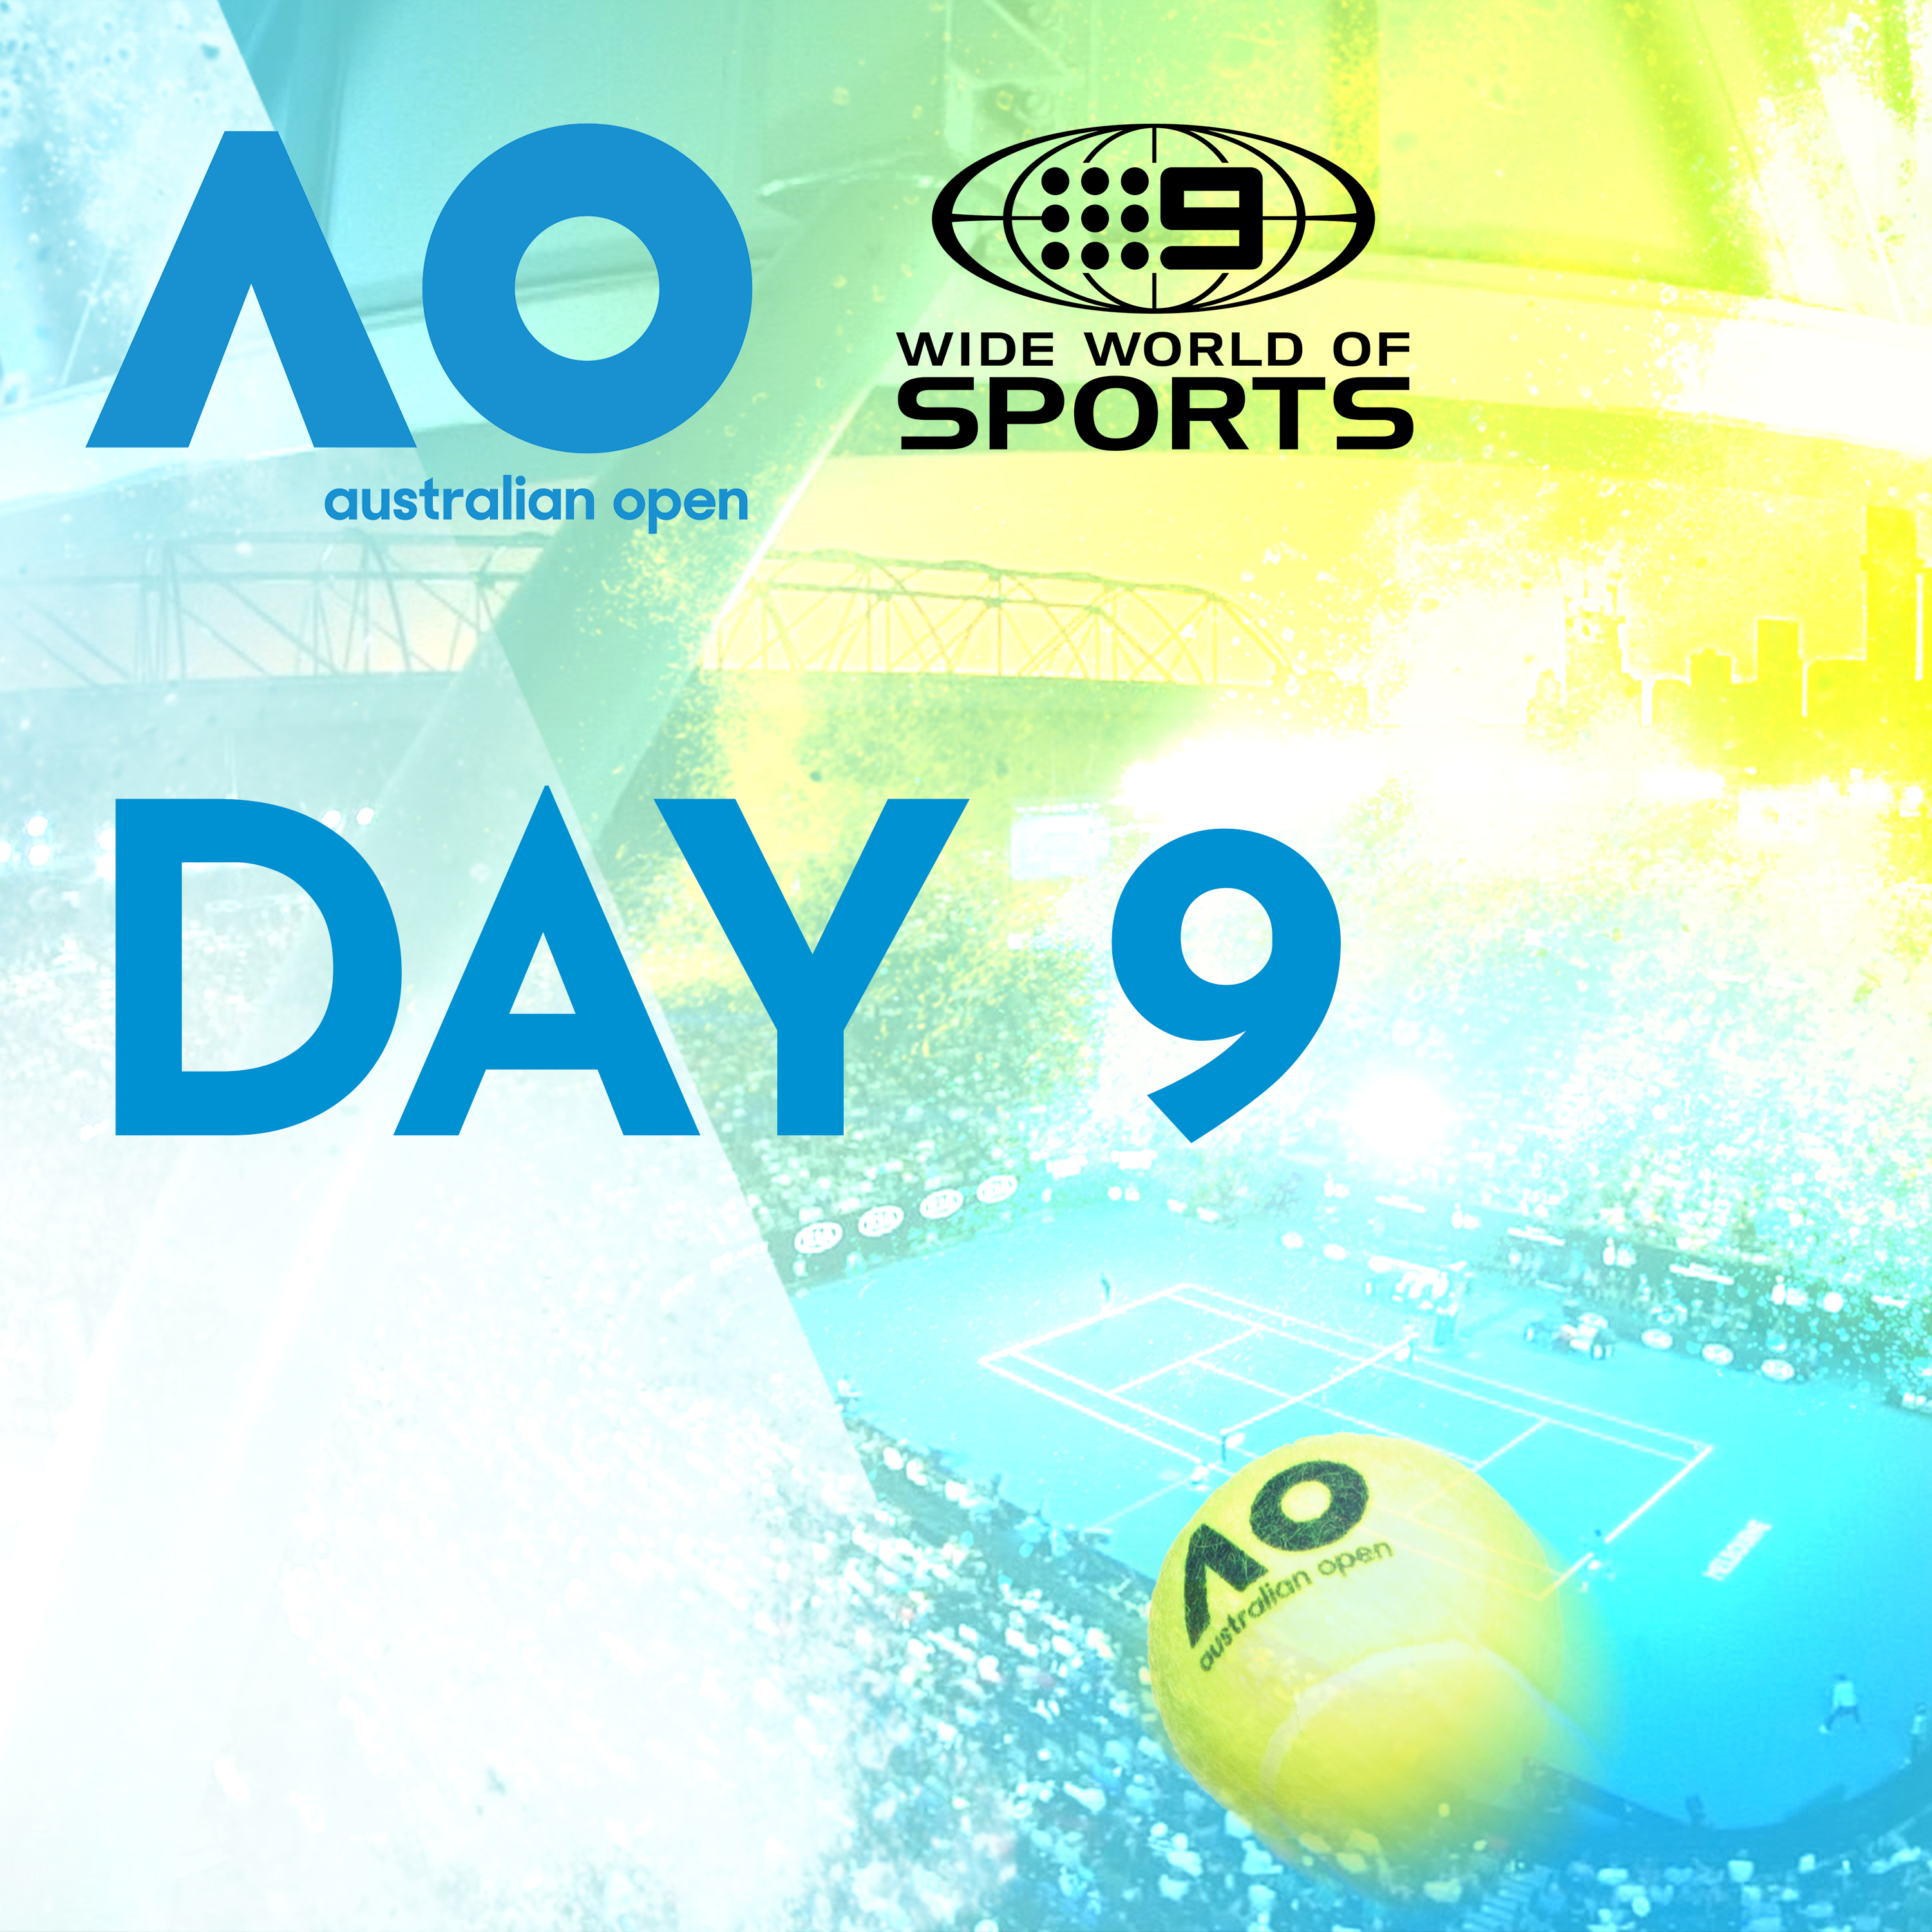 DAY 9 - It is Novak’s to lose